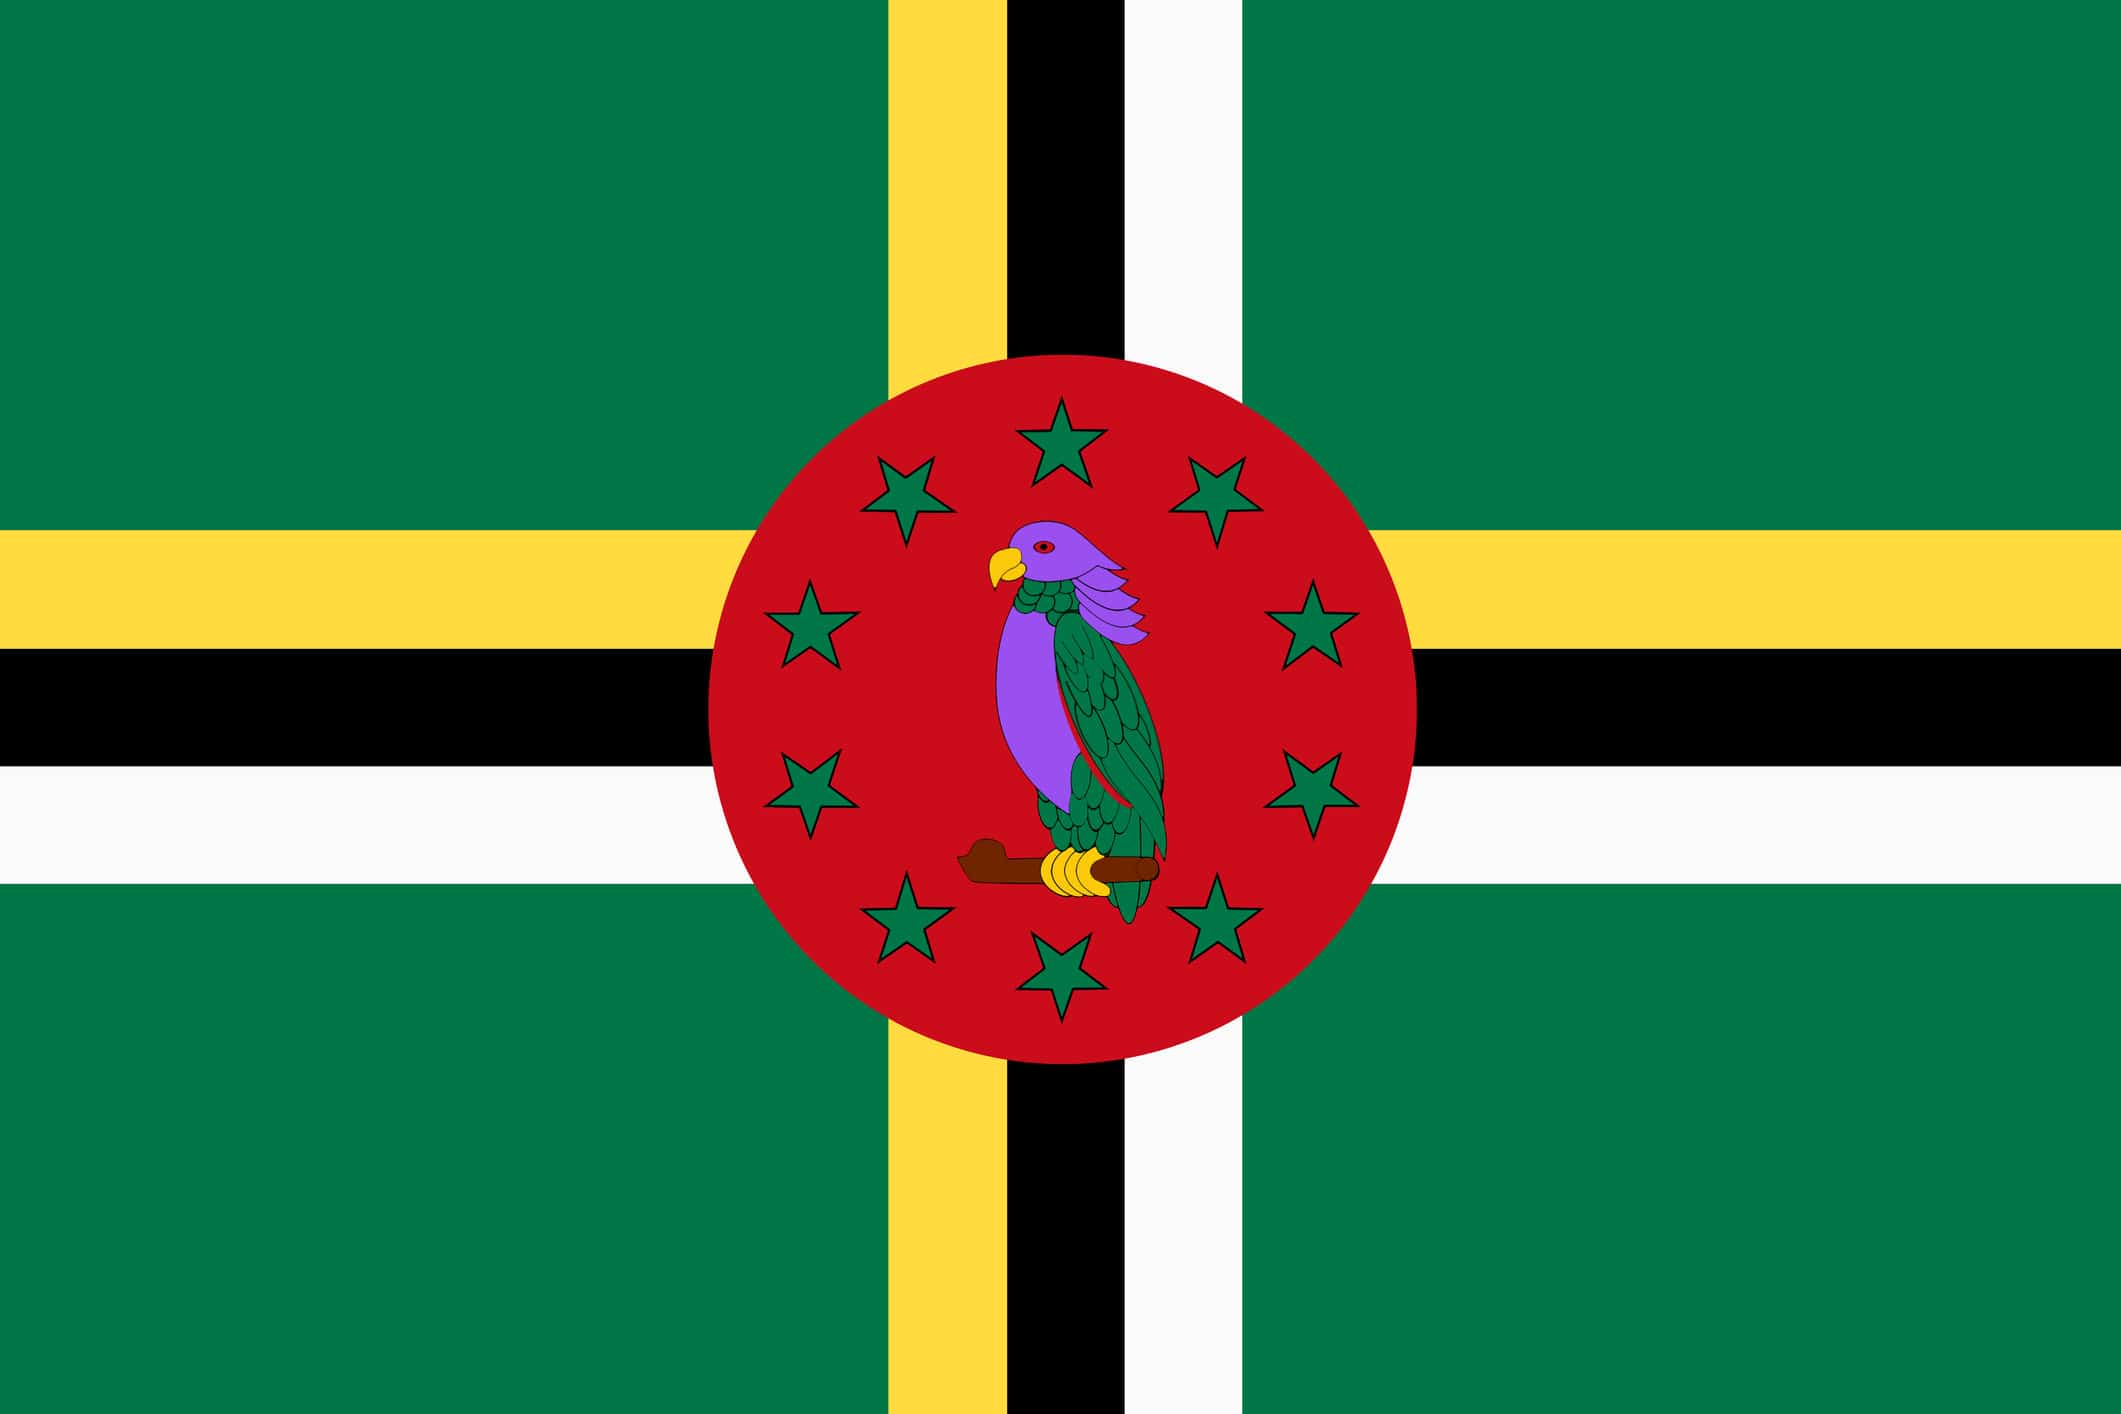 Dominica flag background illustration green yellow black red sisserou parrot